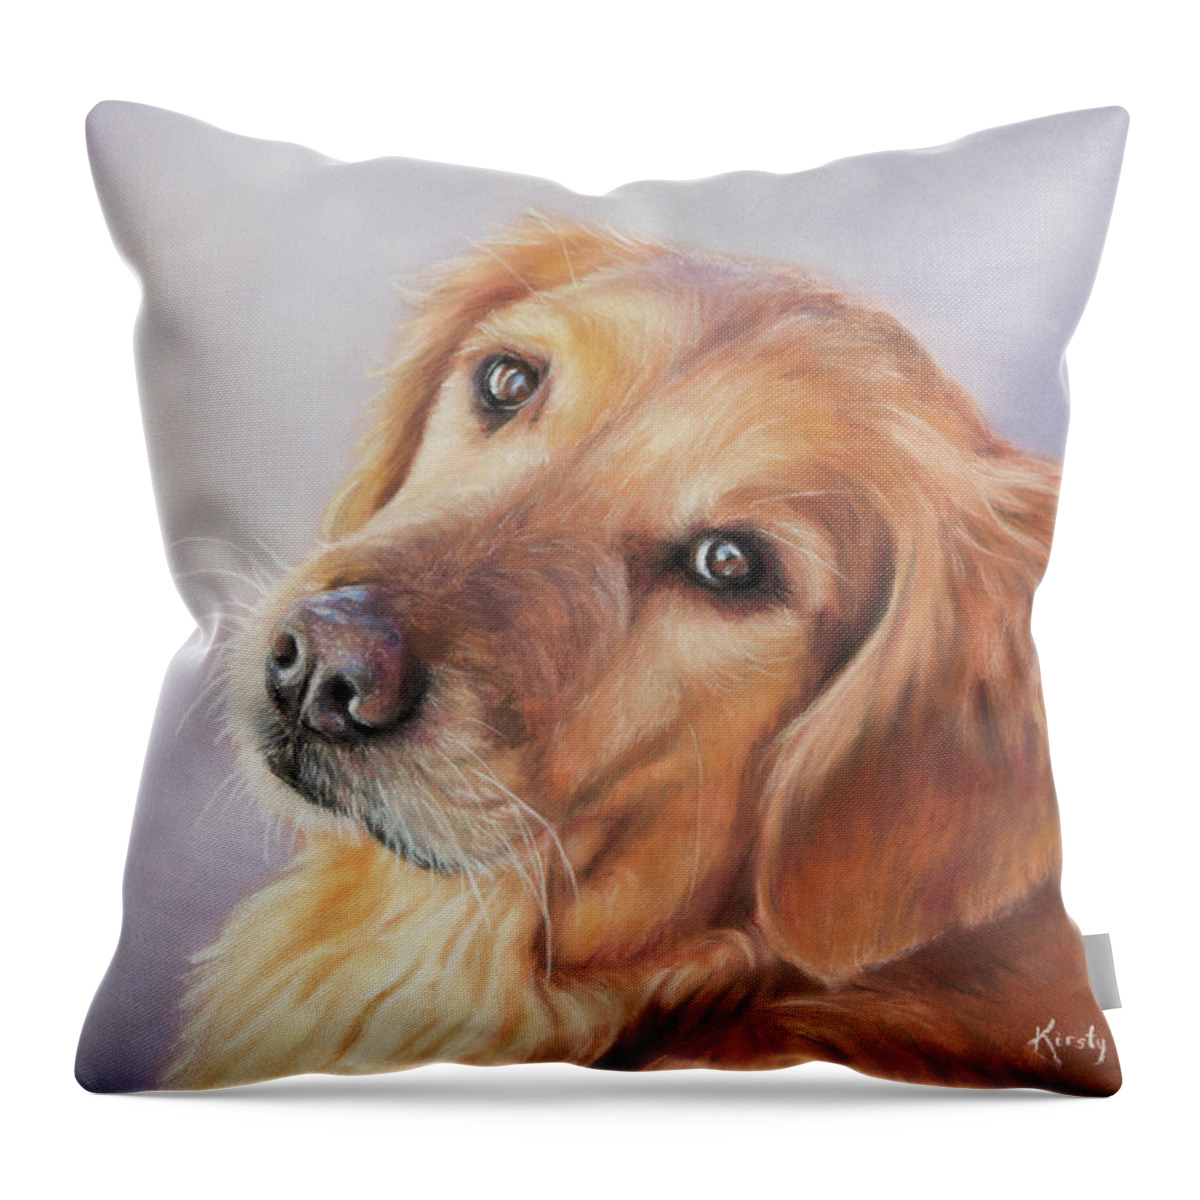 Dog Throw Pillow featuring the pastel Golden by Kirsty Rebecca